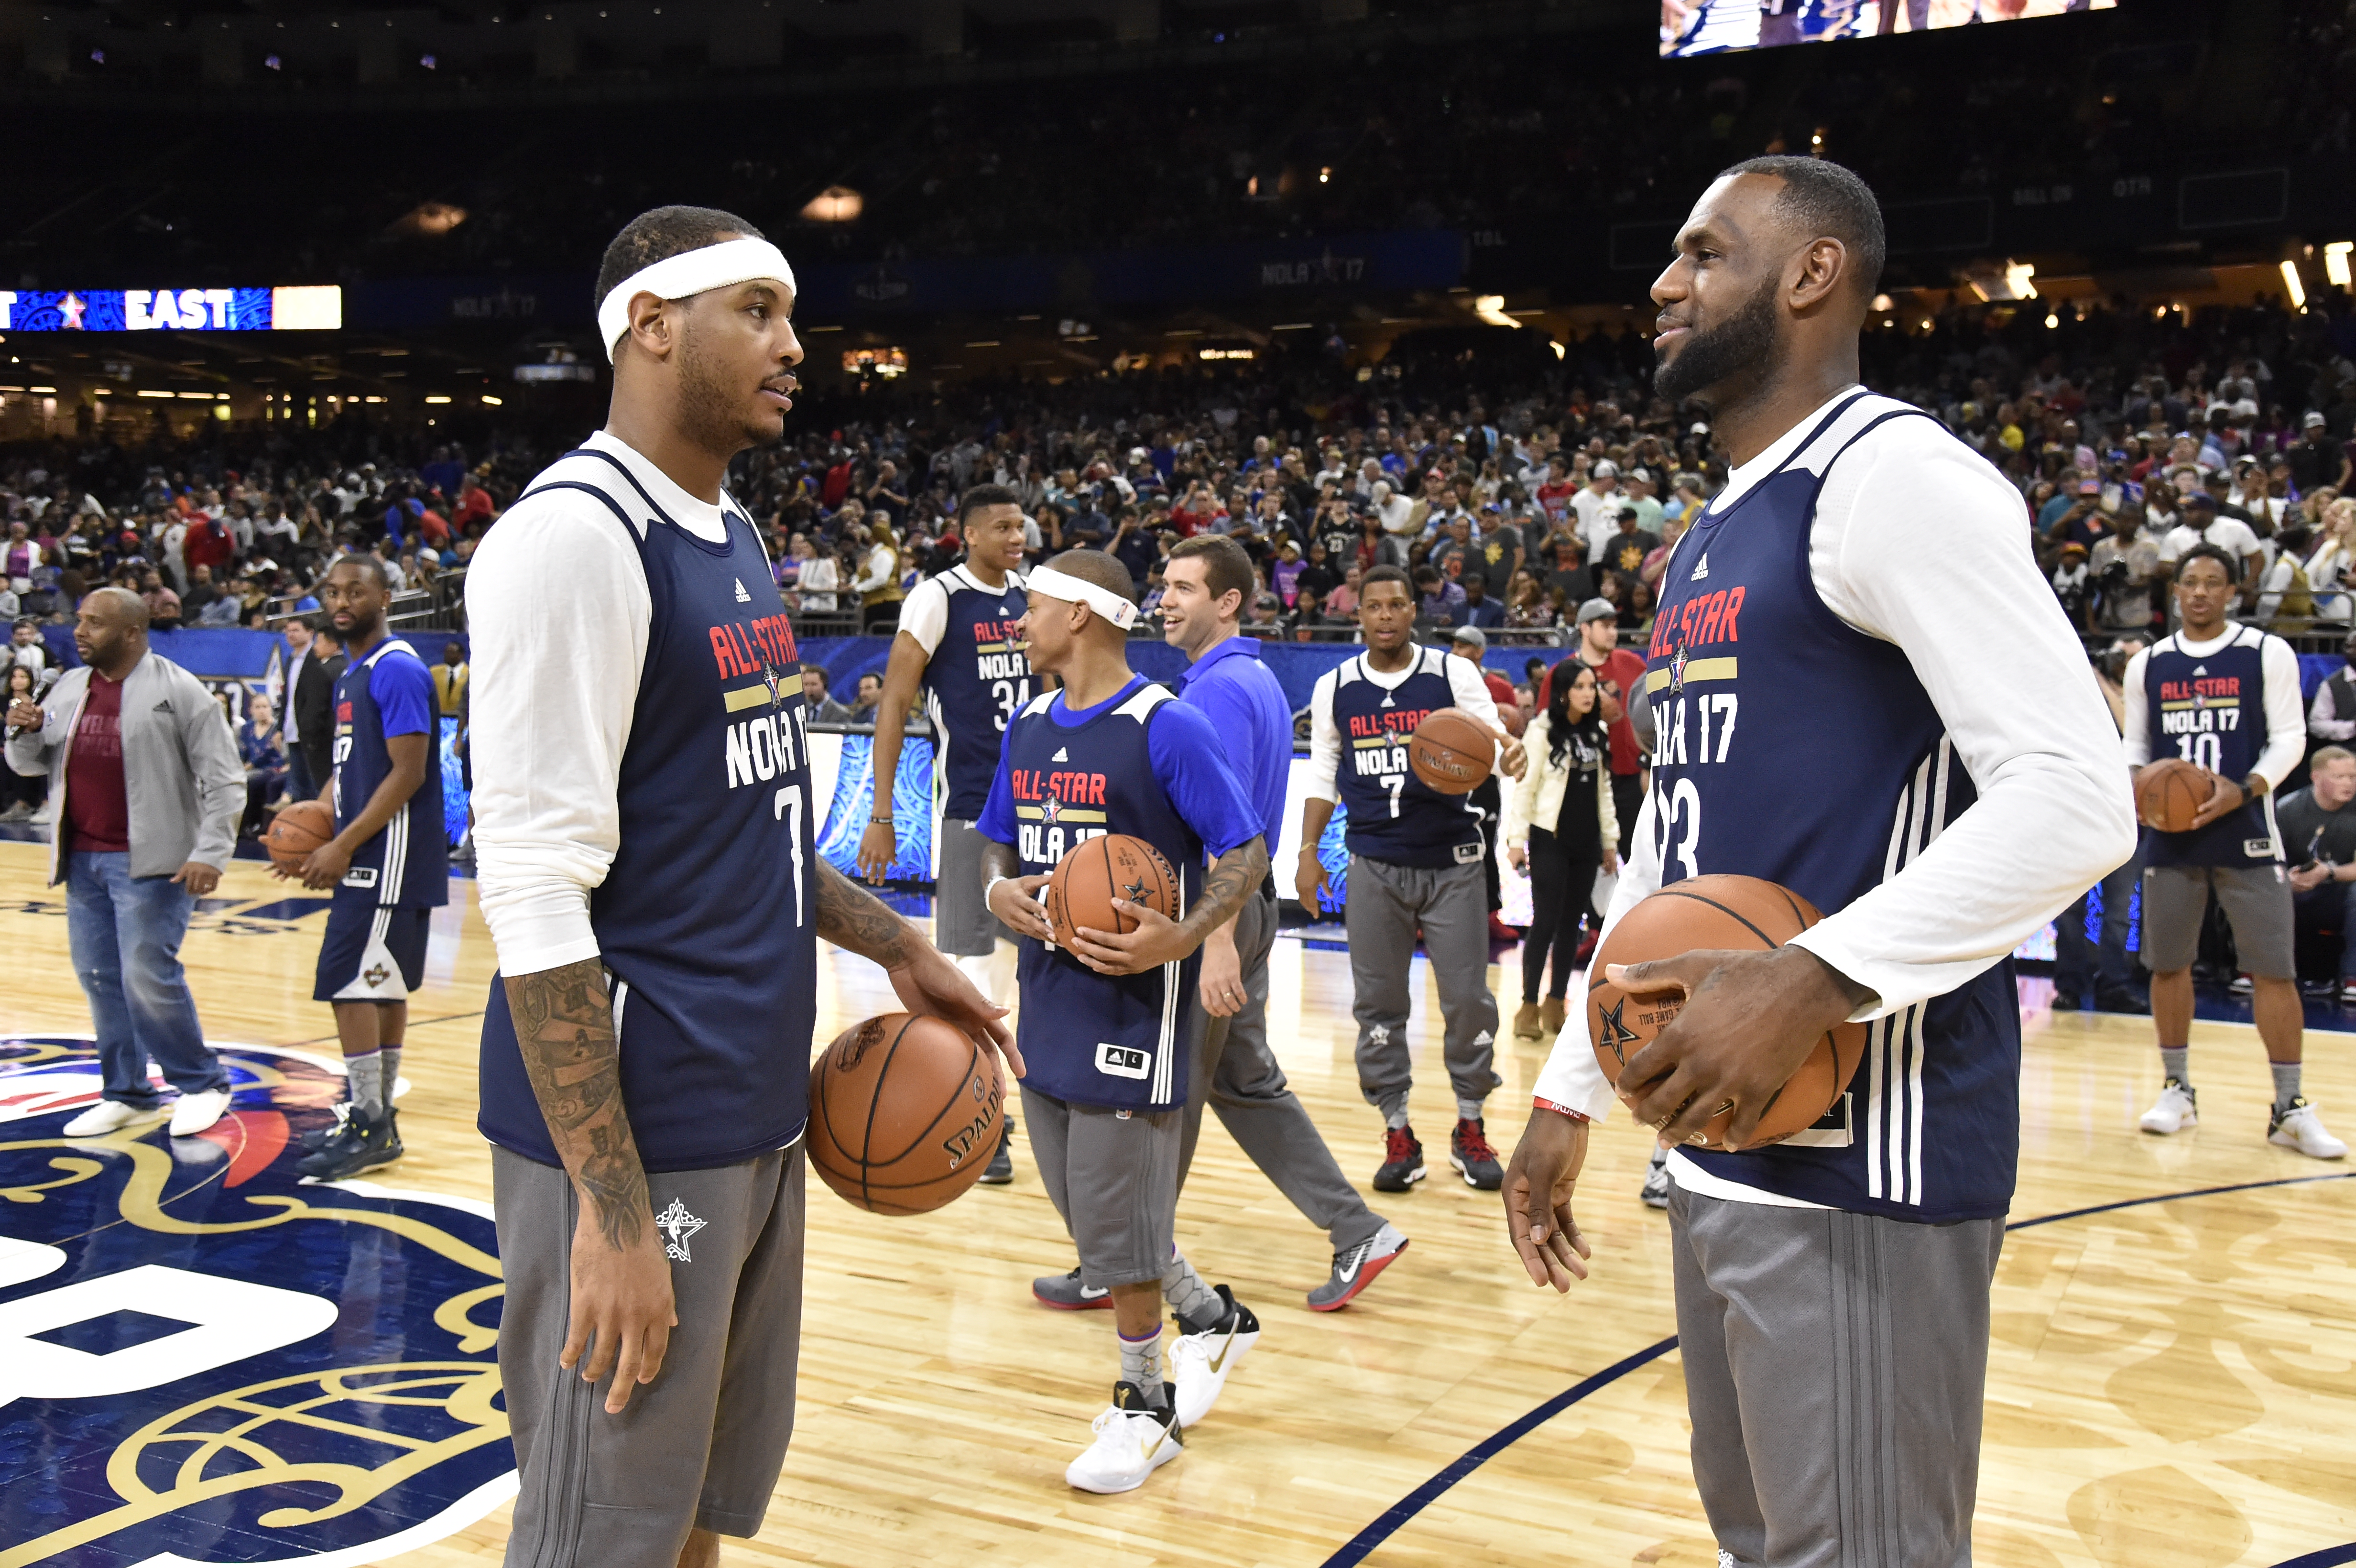 NBA All-Star Game 2017 roster: LeBron James is joined by 4 new